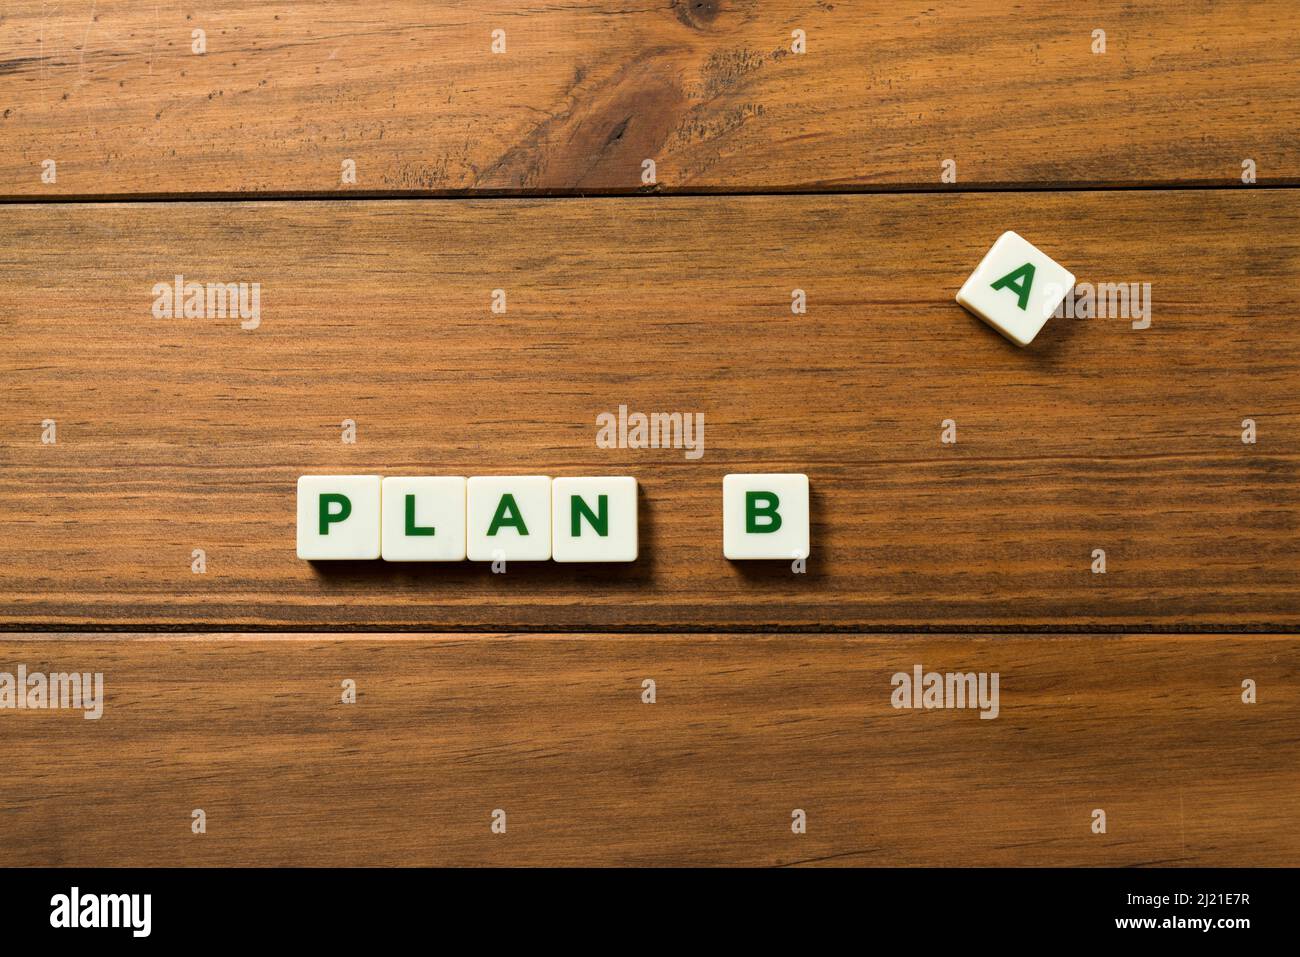 The phrase PLAN B is made up of lettered parts, the letter A is set aside. Concept of planning for the future, resilience and constancy. Background of Stock Photo